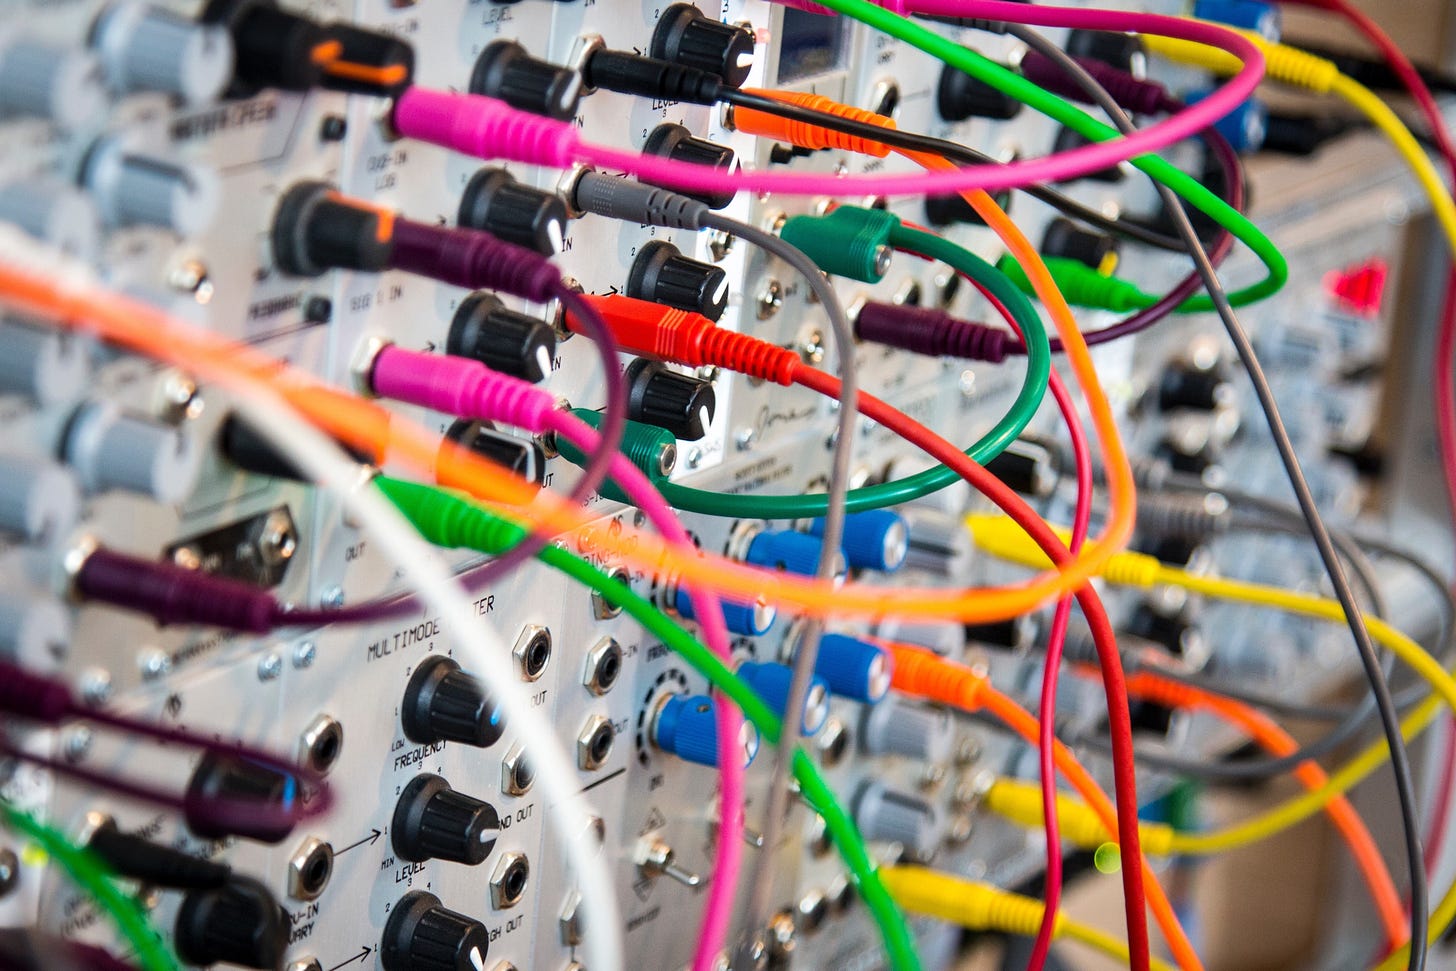 Close up photo of machine with many ports connected with colorful wires.